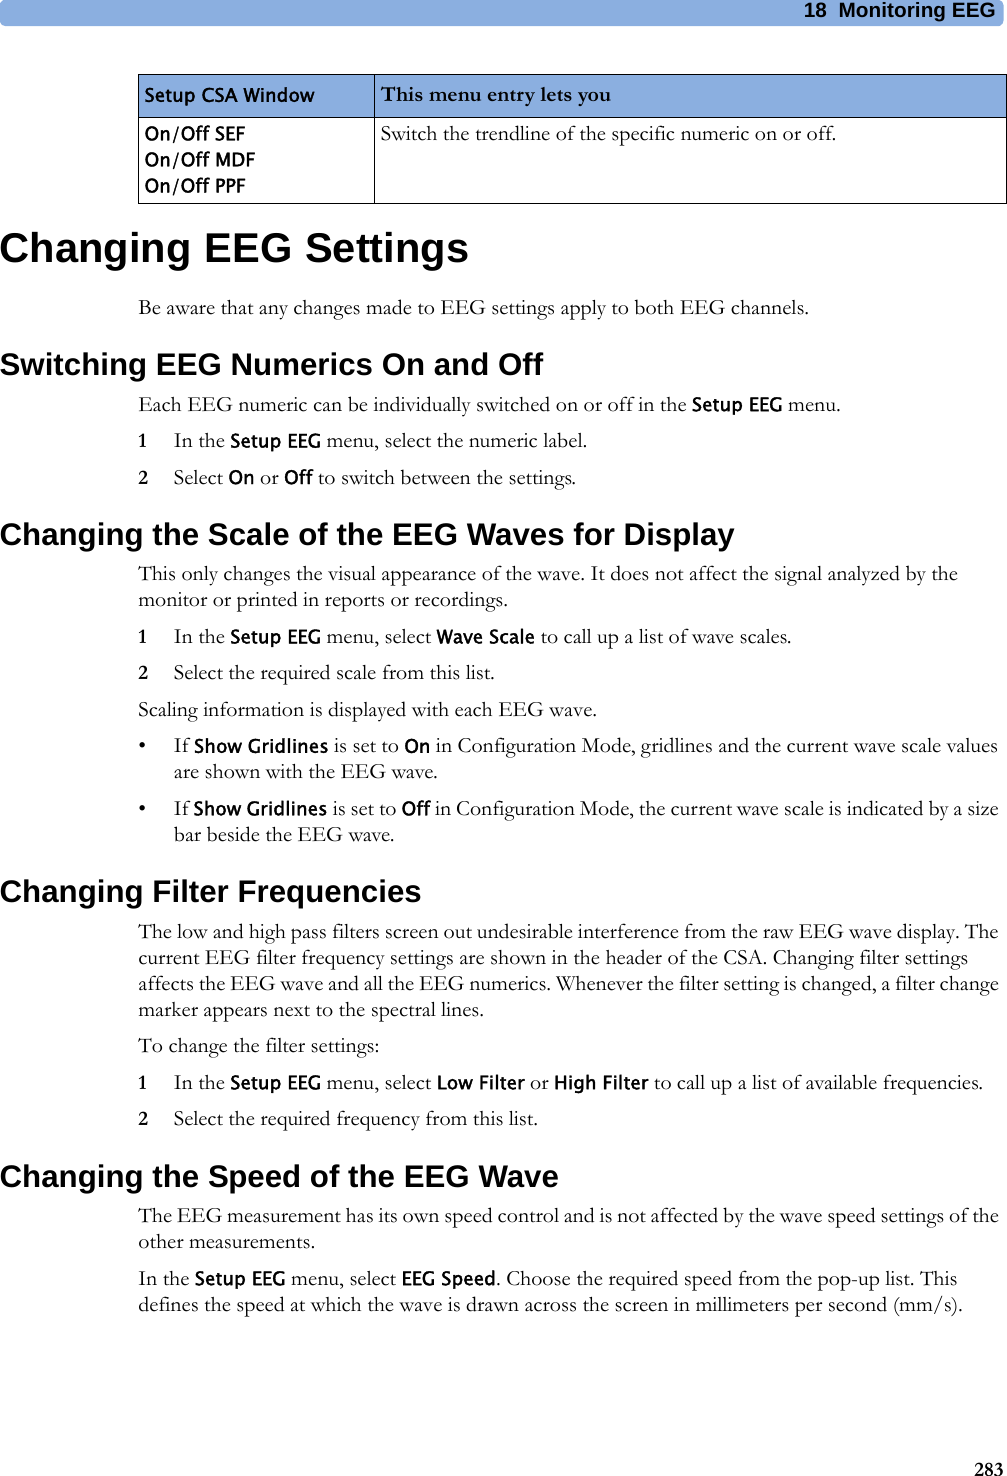 18 Monitoring EEG283Changing EEG SettingsBe aware that any changes made to EEG settings apply to both EEG channels.Switching EEG Numerics On and OffEach EEG numeric can be individually switched on or off in the Setup EEG menu.1In the Setup EEG menu, select the numeric label.2Select On or Off to switch between the settings.Changing the Scale of the EEG Waves for DisplayThis only changes the visual appearance of the wave. It does not affect the signal analyzed by the monitor or printed in reports or recordings.1In the Setup EEG menu, select Wave Scale to call up a list of wave scales.2Select the required scale from this list.Scaling information is displayed with each EEG wave.•If Show Gridlines is set to On in Configuration Mode, gridlines and the current wave scale values are shown with the EEG wave.•If Show Gridlines is set to Off in Configuration Mode, the current wave scale is indicated by a size bar beside the EEG wave.Changing Filter FrequenciesThe low and high pass filters screen out undesirable interference from the raw EEG wave display. The current EEG filter frequency settings are shown in the header of the CSA. Changing filter settings affects the EEG wave and all the EEG numerics. Whenever the filter setting is changed, a filter change marker appears next to the spectral lines.To change the filter settings:1In the Setup EEG menu, select Low Filter or High Filter to call up a list of available frequencies.2Select the required frequency from this list.Changing the Speed of the EEG WaveThe EEG measurement has its own speed control and is not affected by the wave speed settings of the other measurements.In the Setup EEG menu, select EEG Speed. Choose the required speed from the pop-up list. This defines the speed at which the wave is drawn across the screen in millimeters per second (mm/s).On/Off SEFOn/Off MDFOn/Off PPFSwitch the trendline of the specific numeric on or off.Setup CSA Window This menu entry lets you